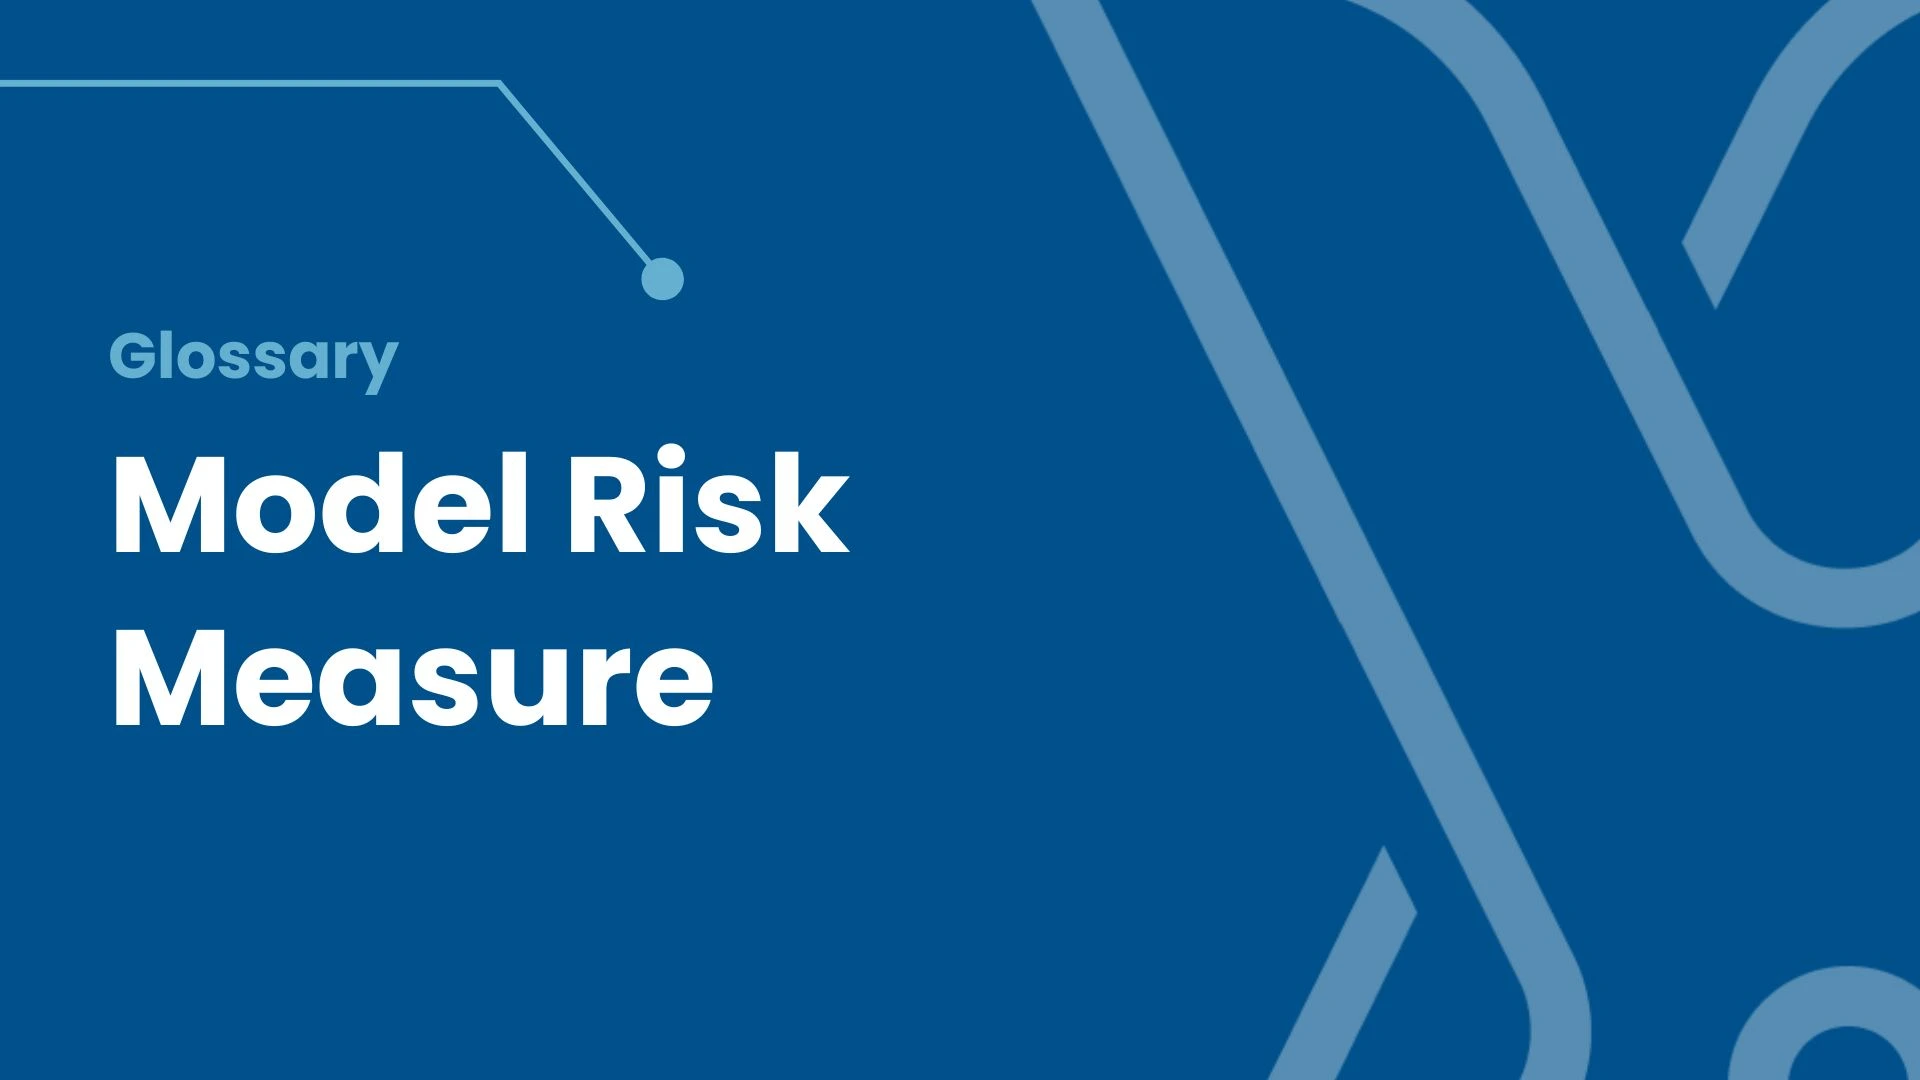 What is a Model Risk Measure?